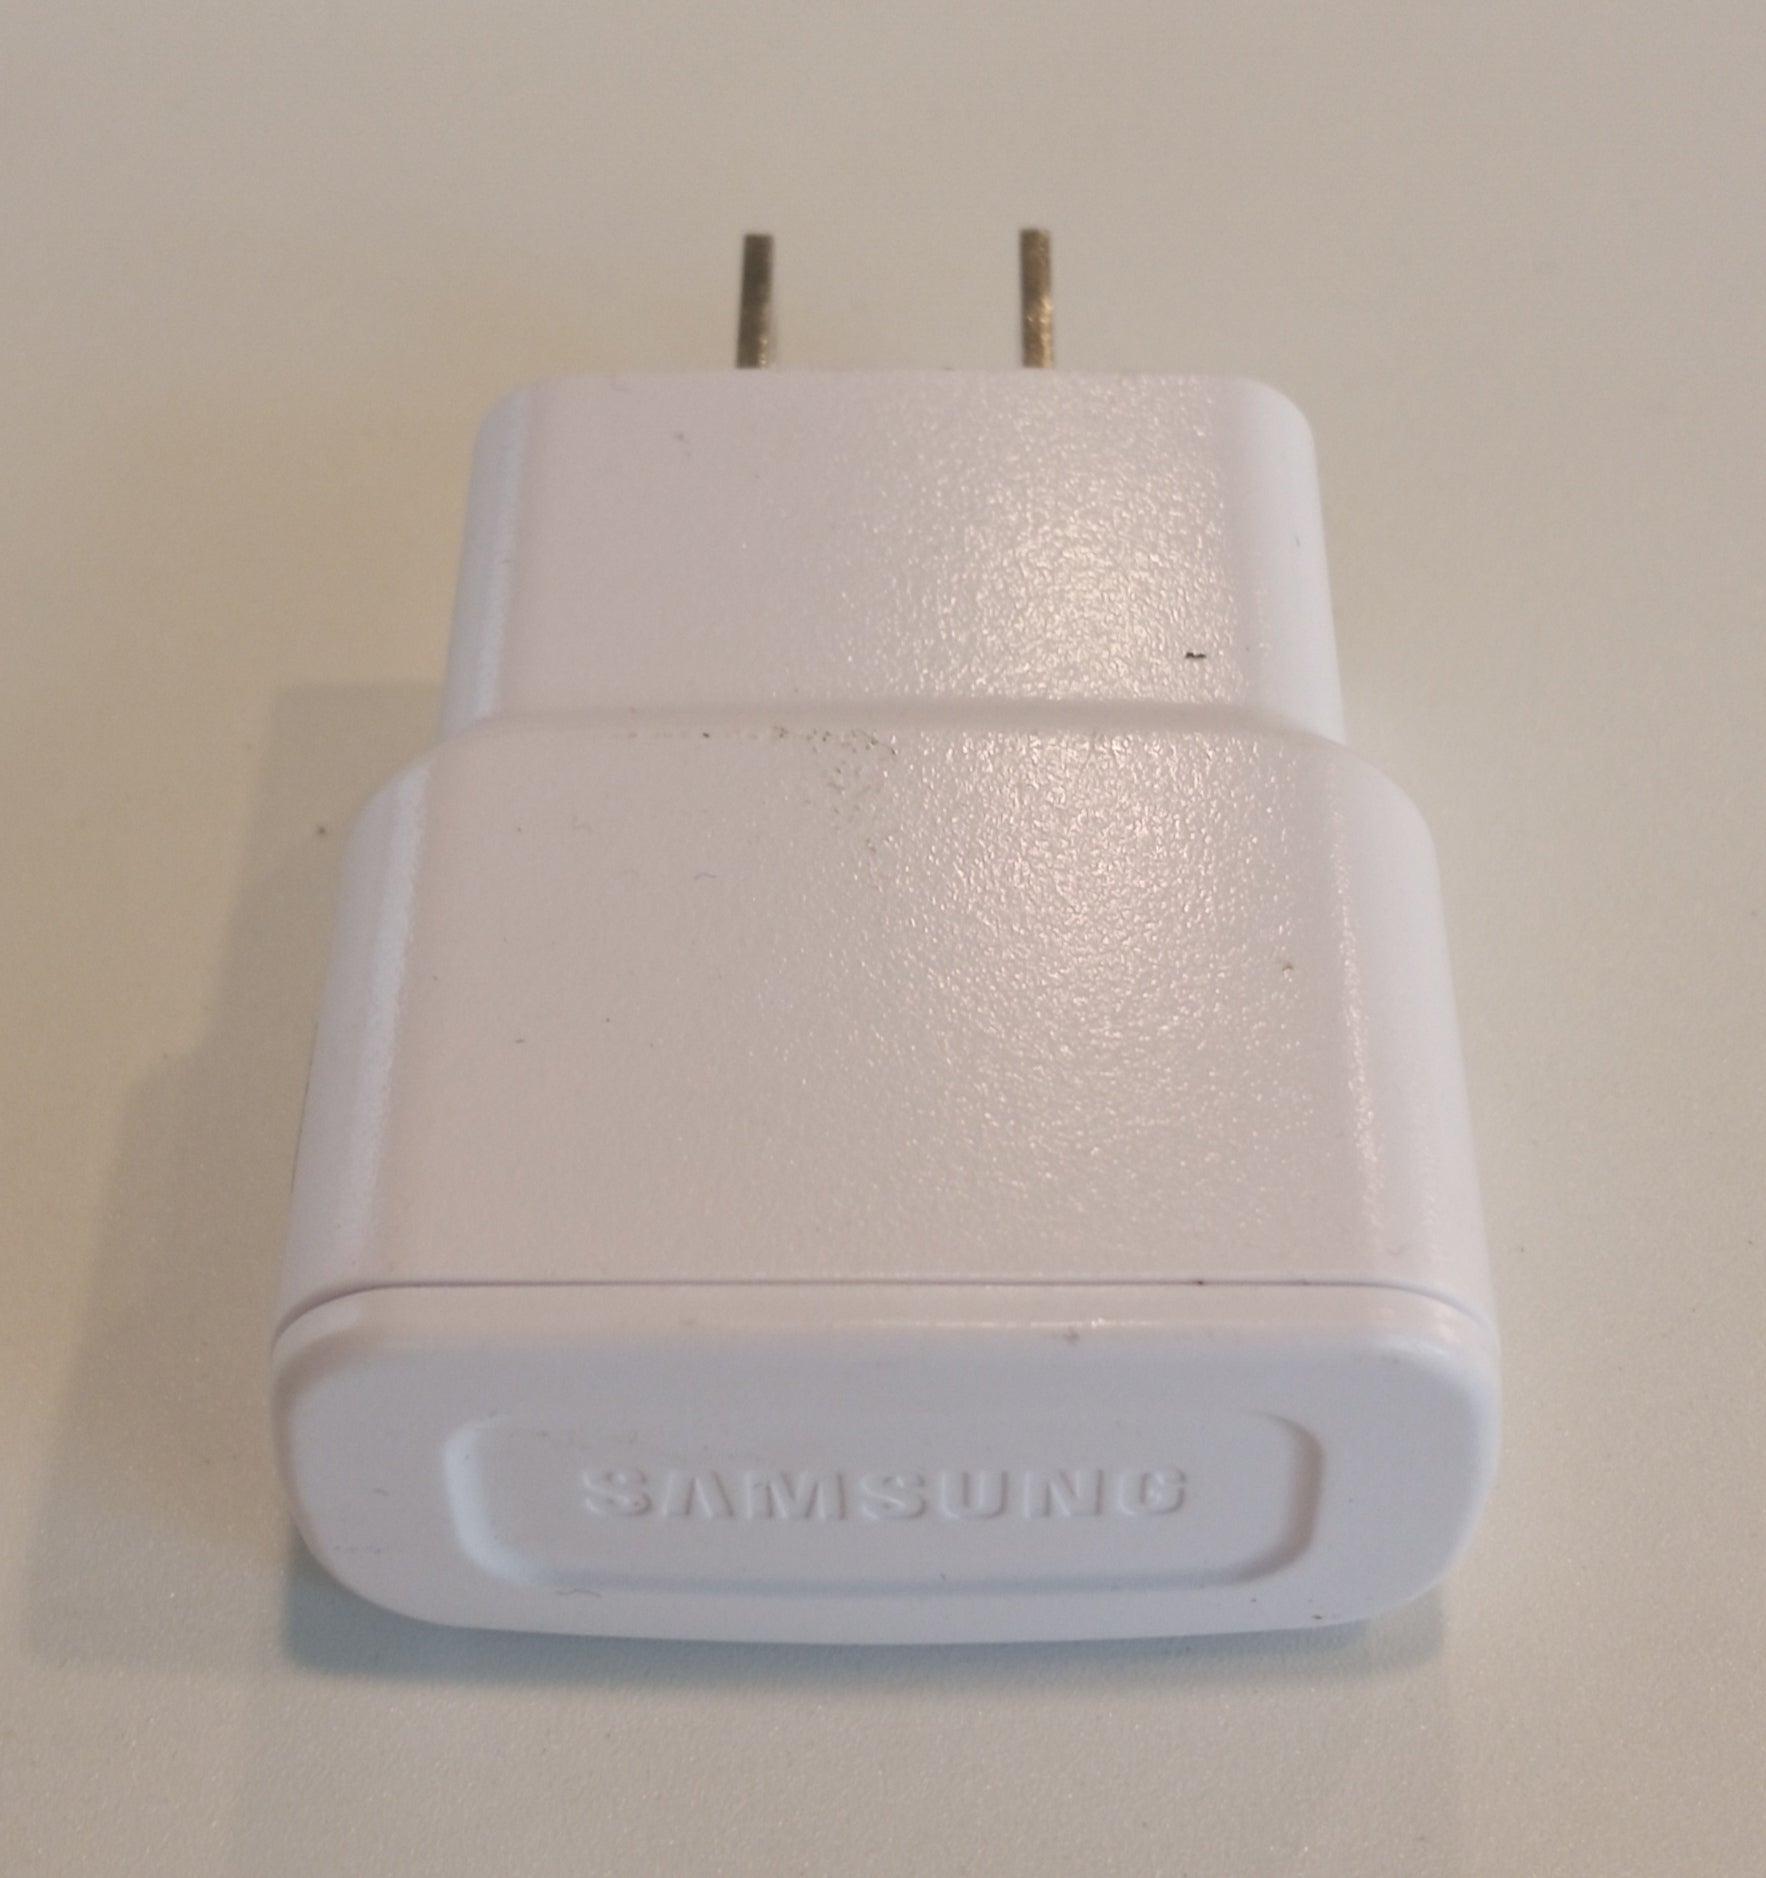 Samsung Travel Adapter - US Imported